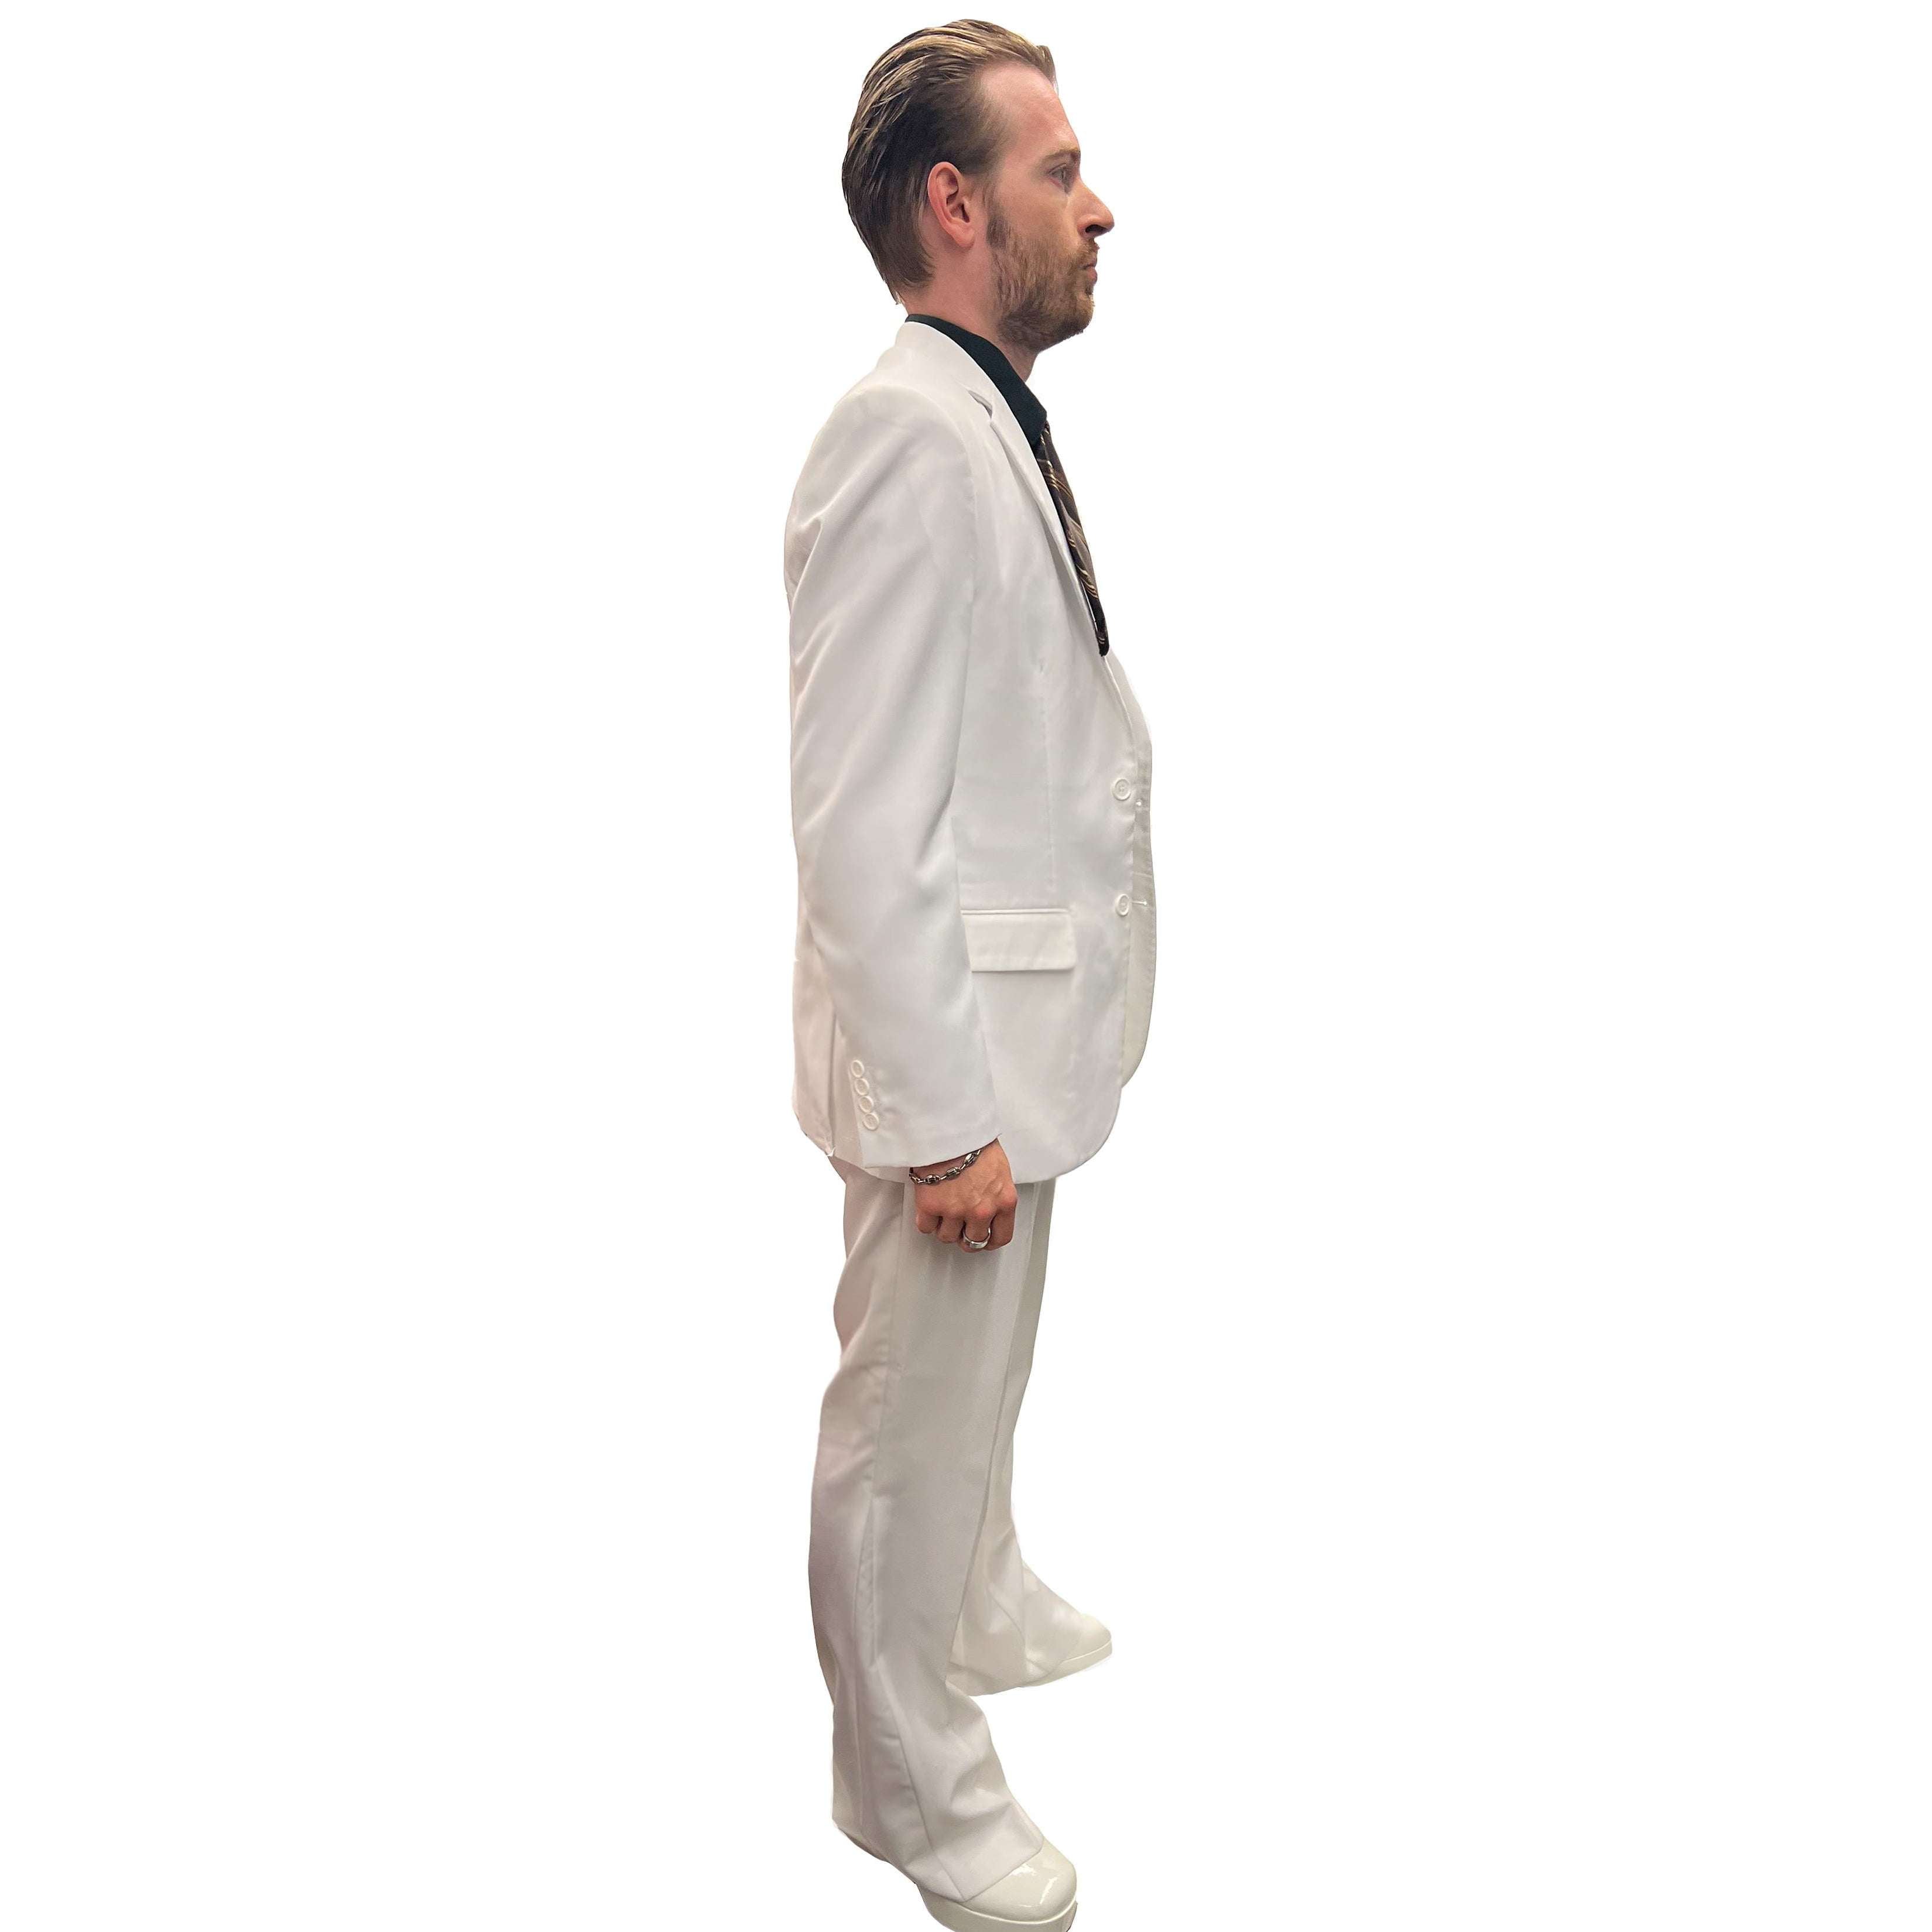 1970s Classy All White Suit Adult Costume